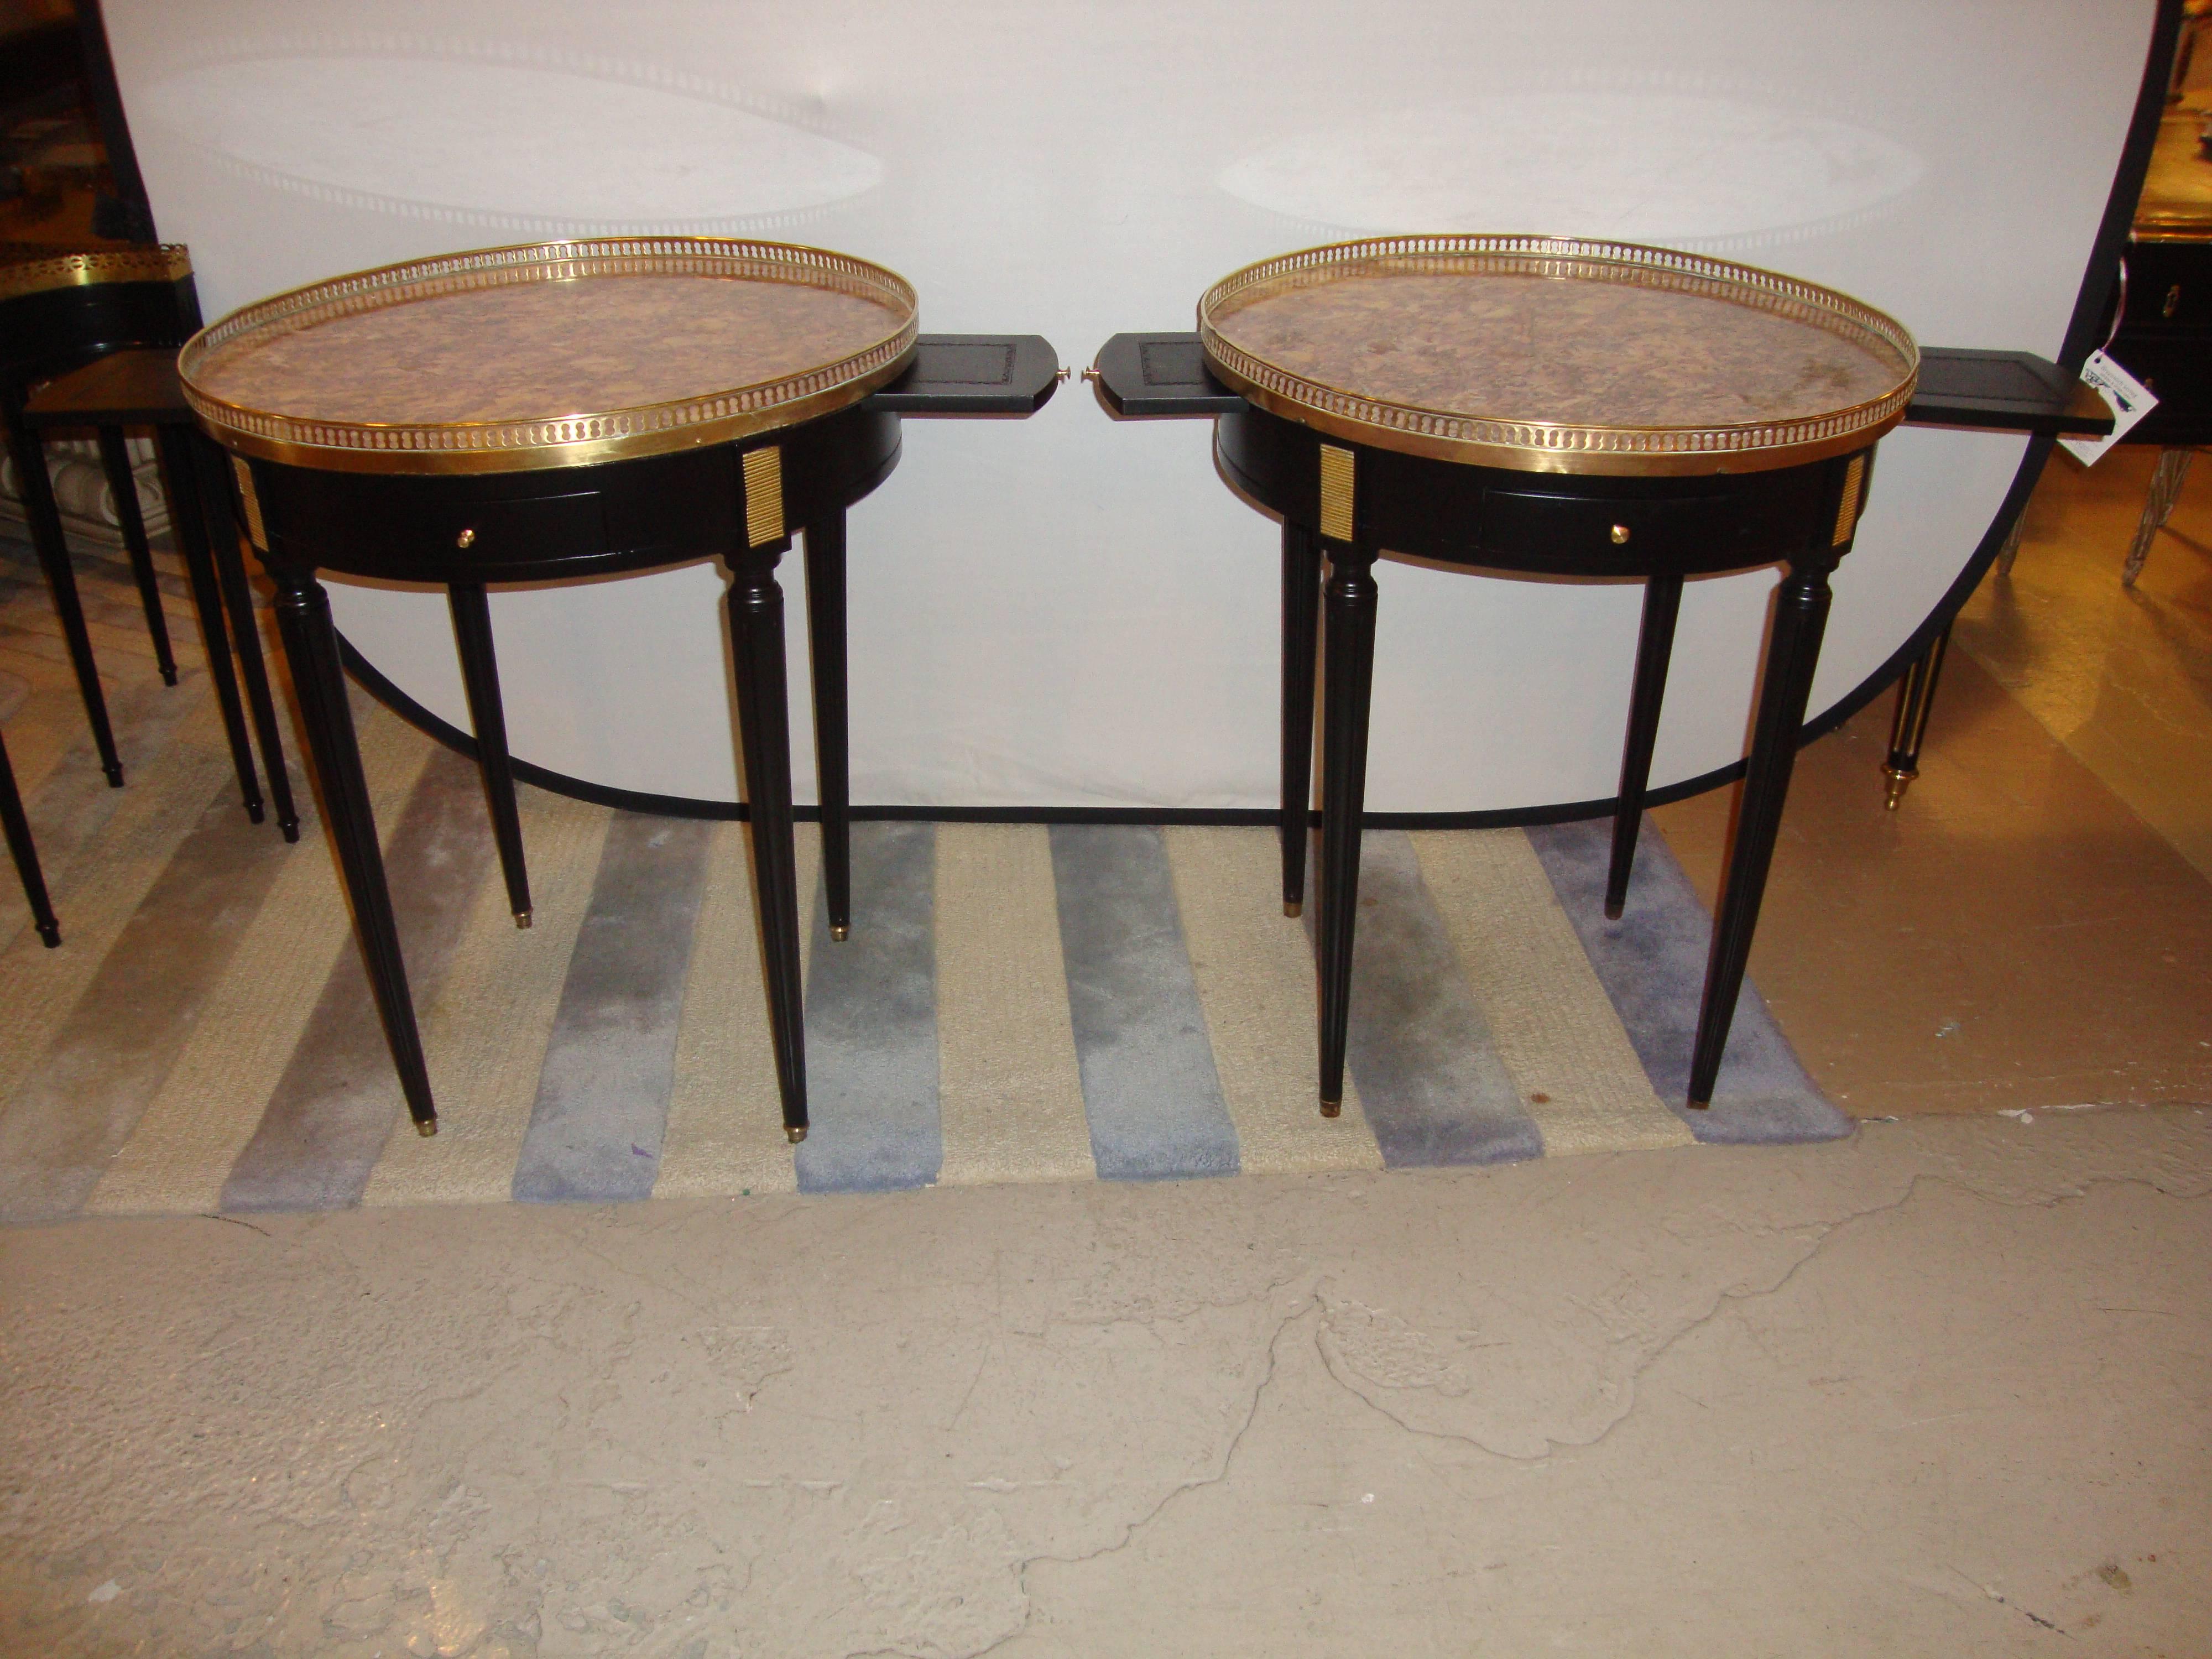 Pair of Maison Jansen Bouillotte or end tables. These finely constructed Bouillotte or end tables each have a pierced bronze gallery framing the rose colored marble top. The top supported by a recently refinished ebony base having drawer and